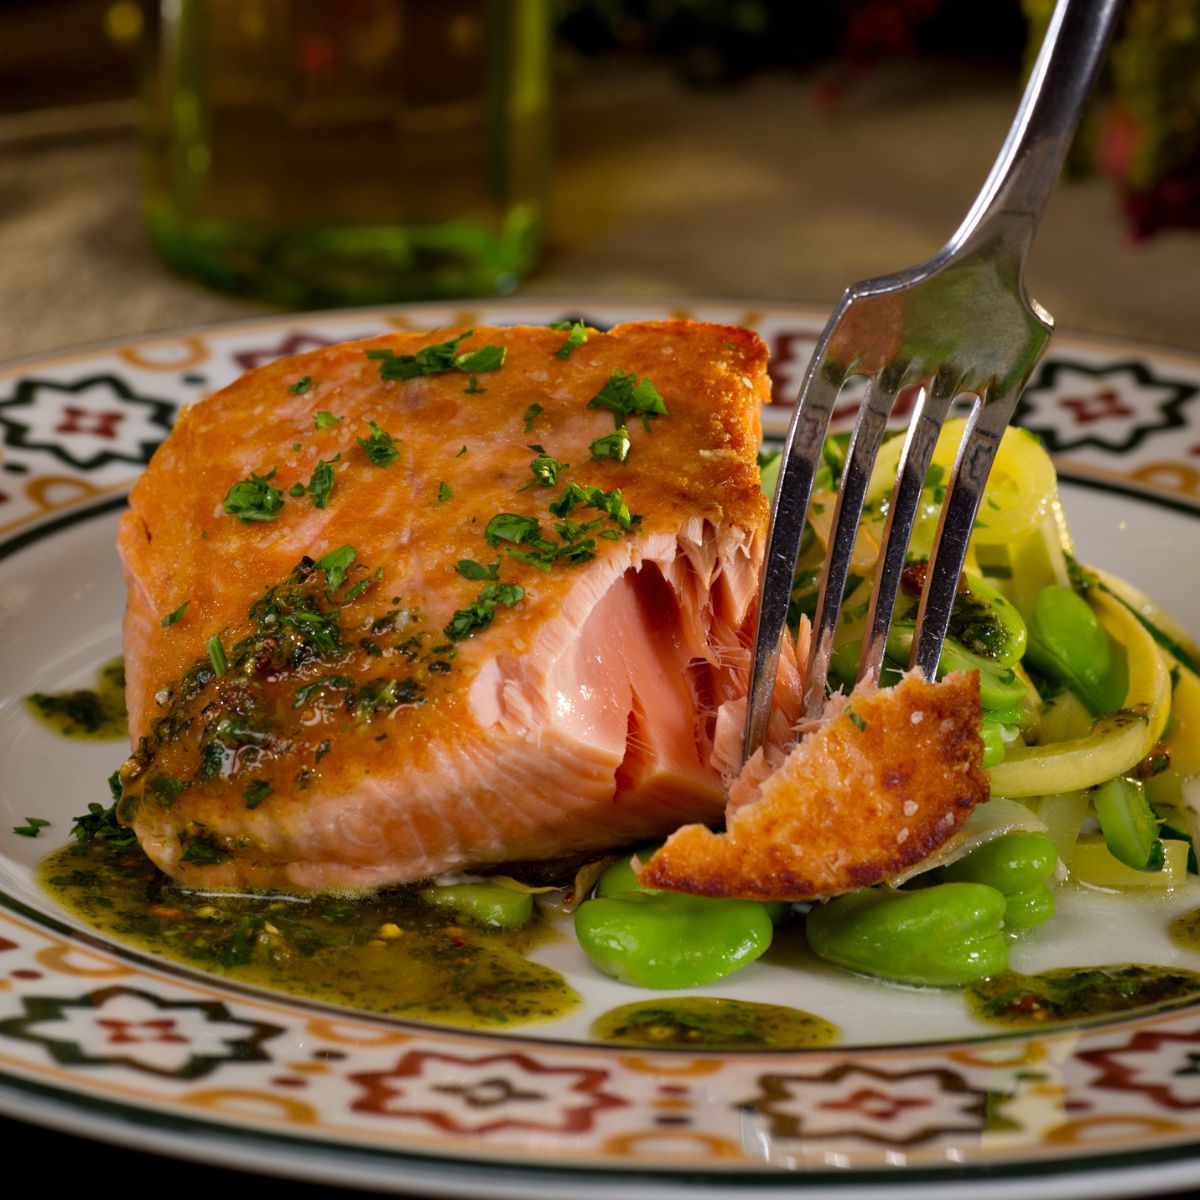 Grilled salmon with lemons, chilis and chimichurri sauce on a plate